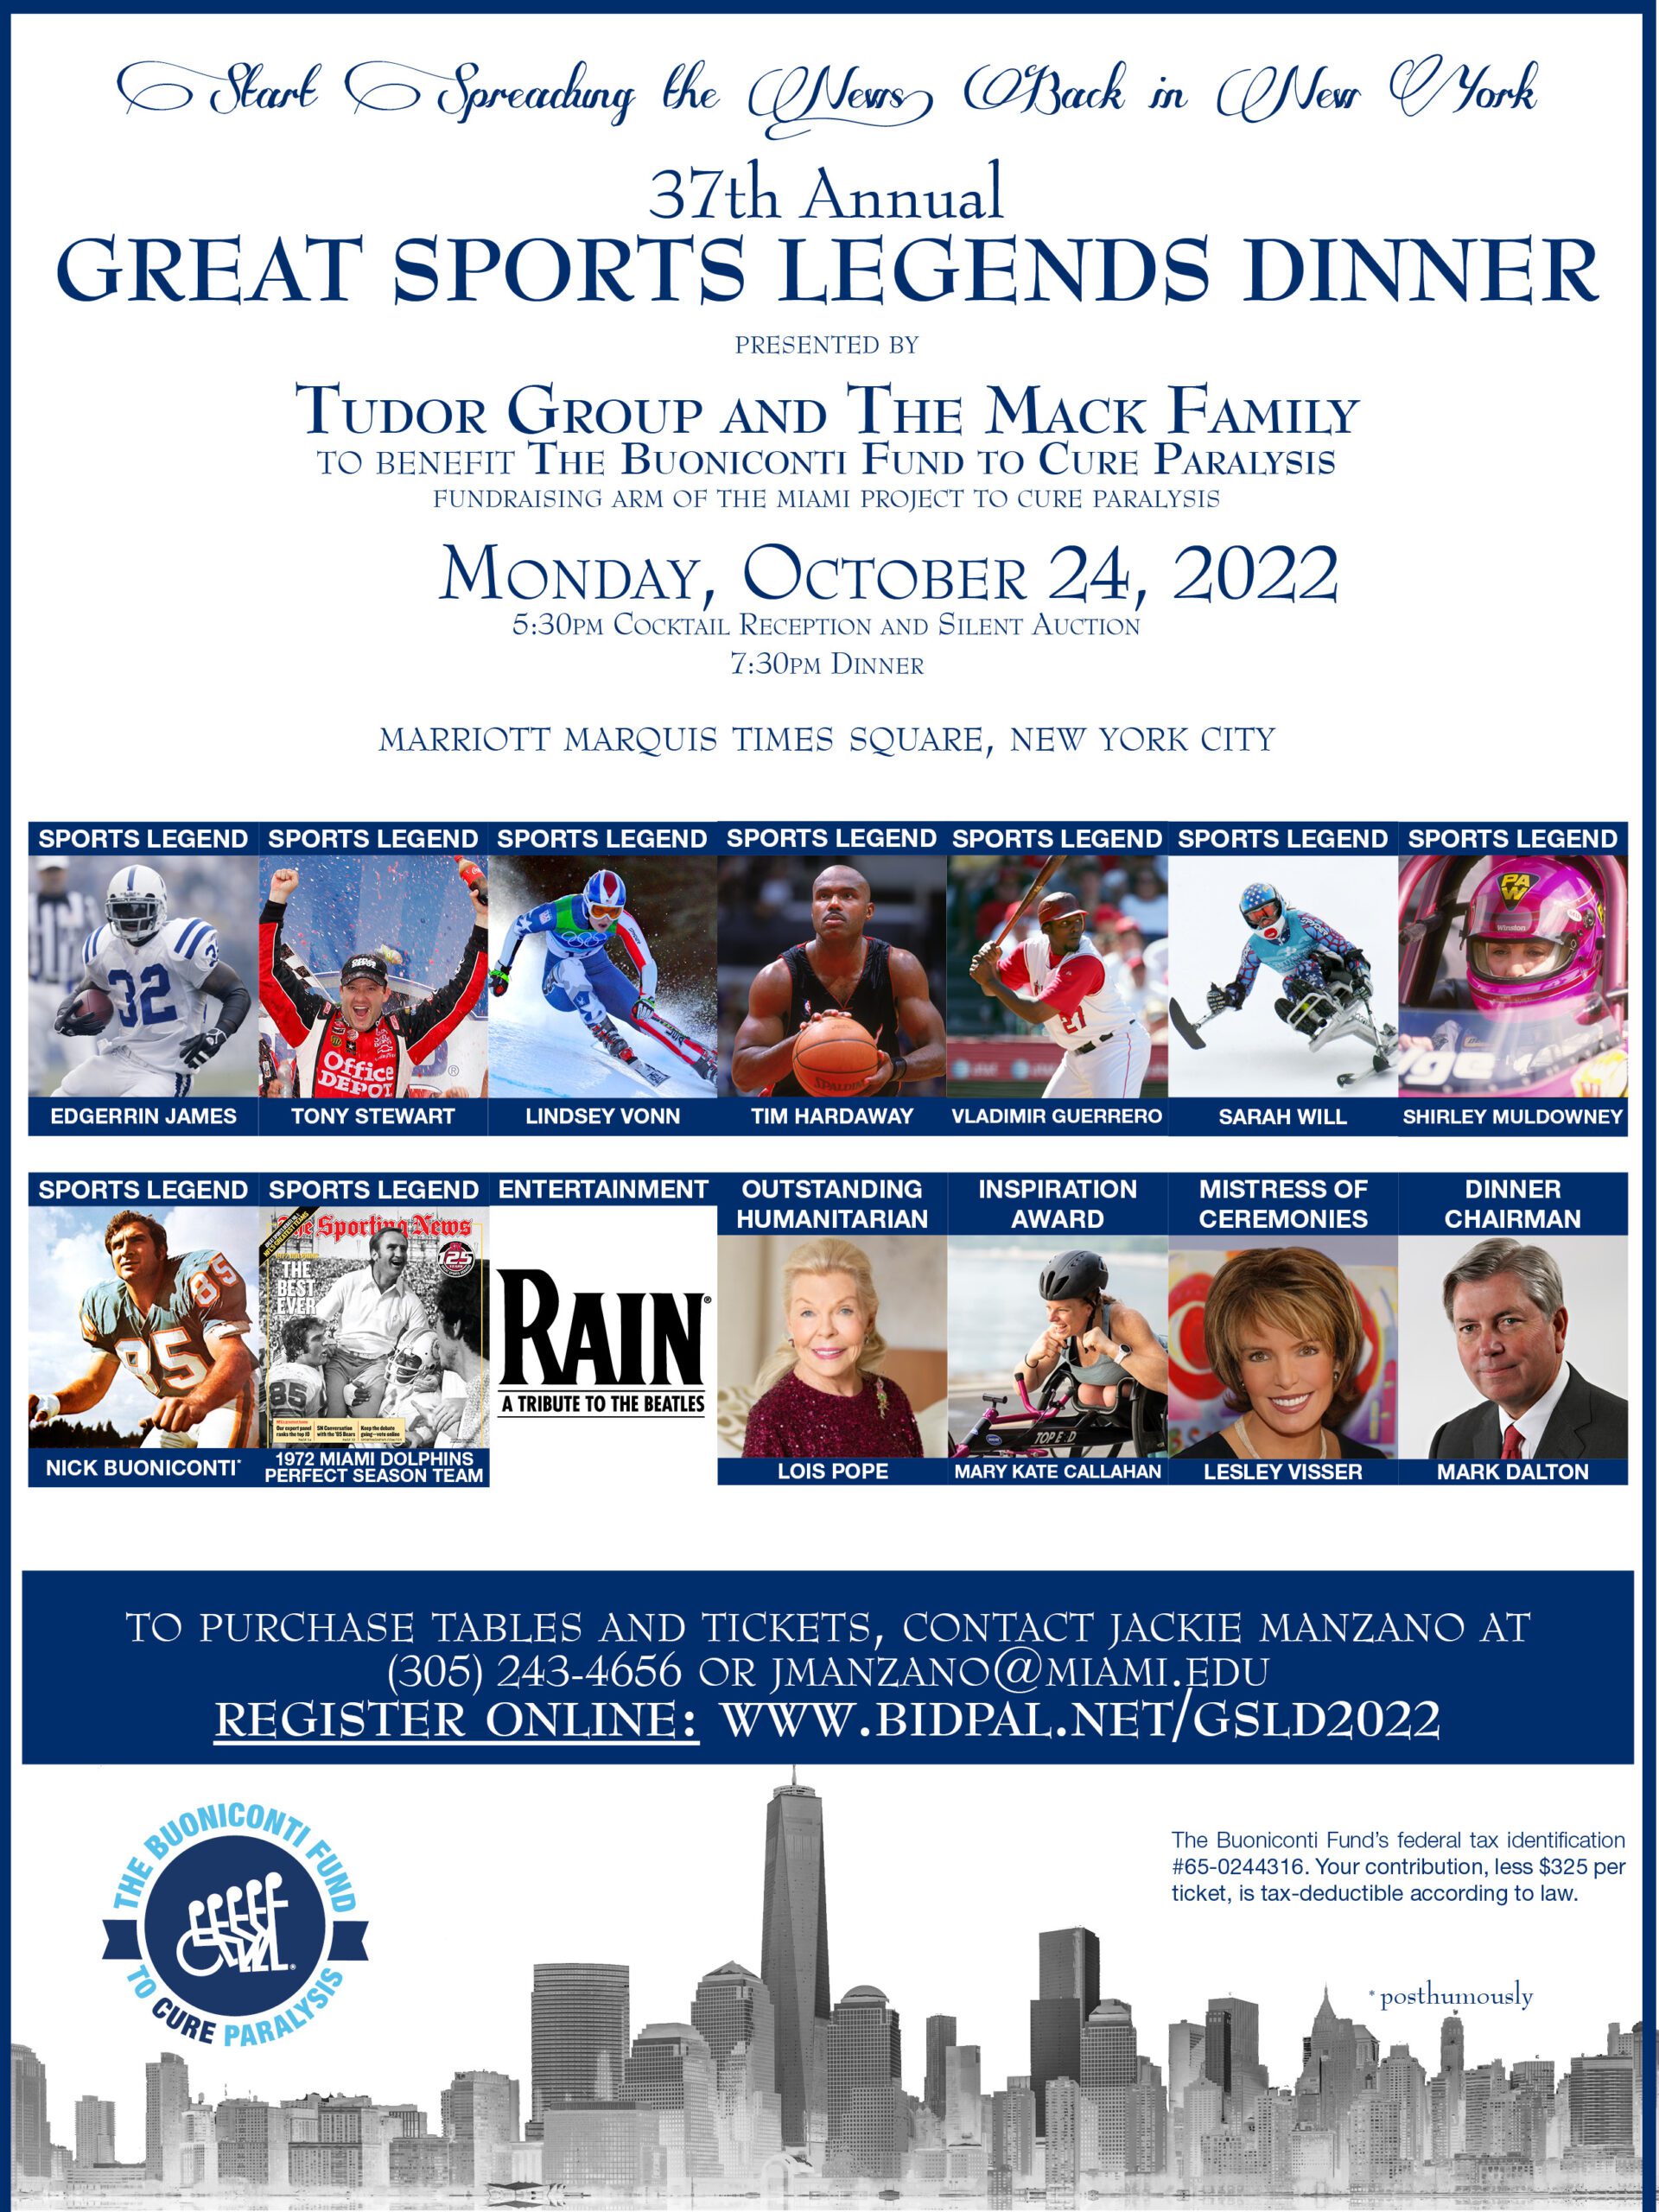 37th Annual Great Sports Legends Dinner - The Miami Project